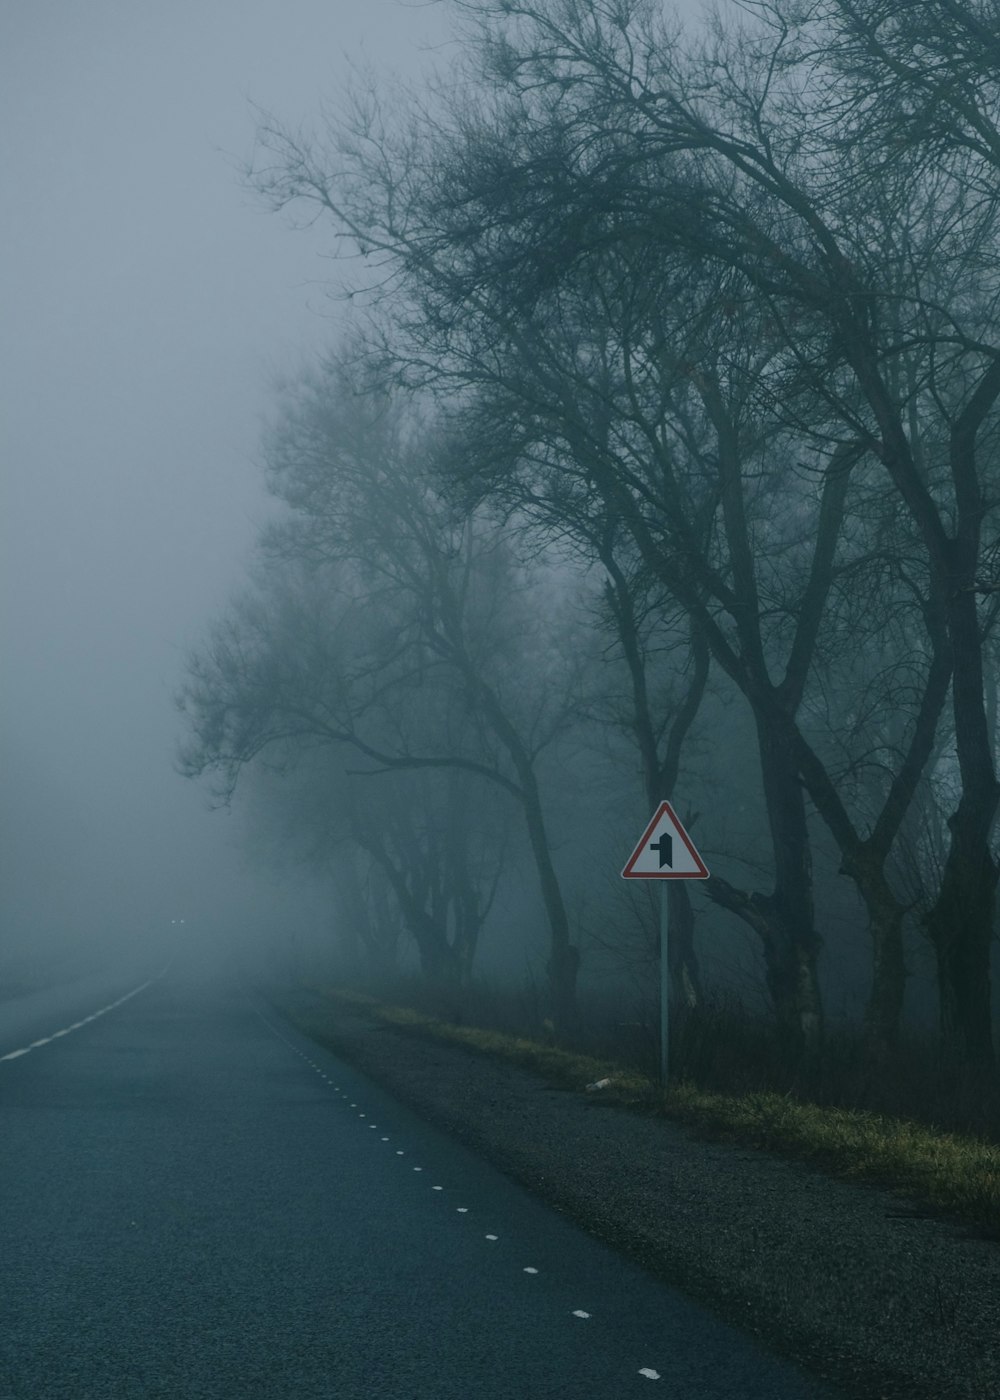 a foggy road with trees and a street sign